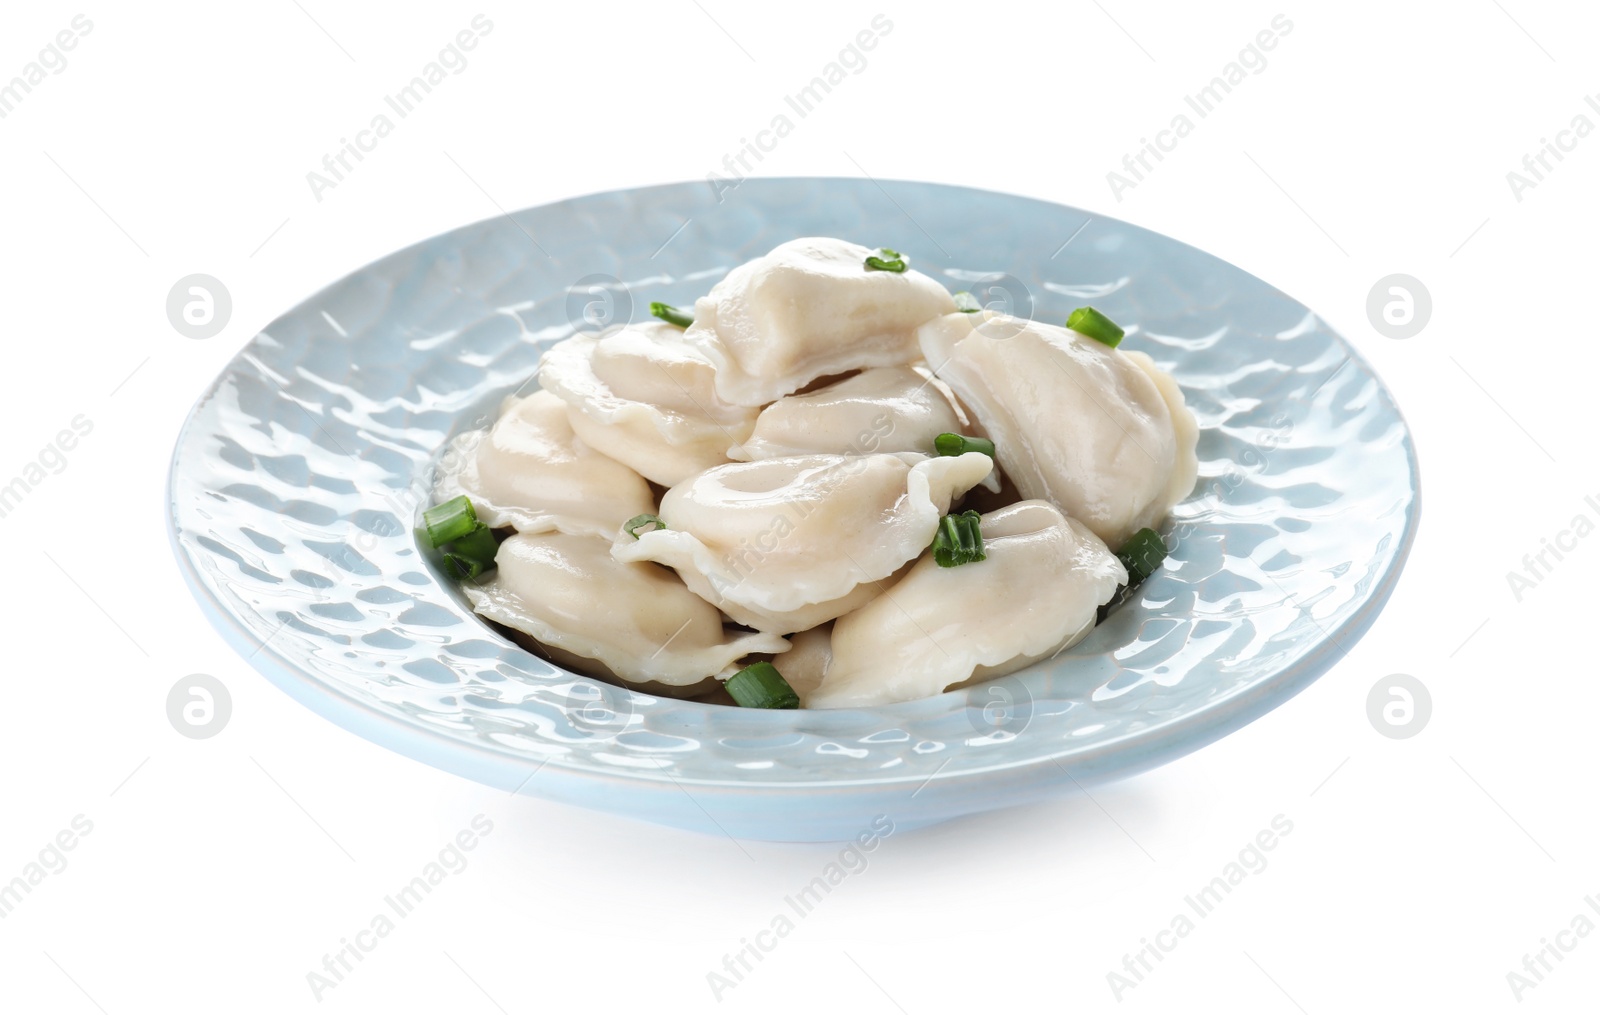 Photo of Plate of tasty dumplings served with green onion on white background